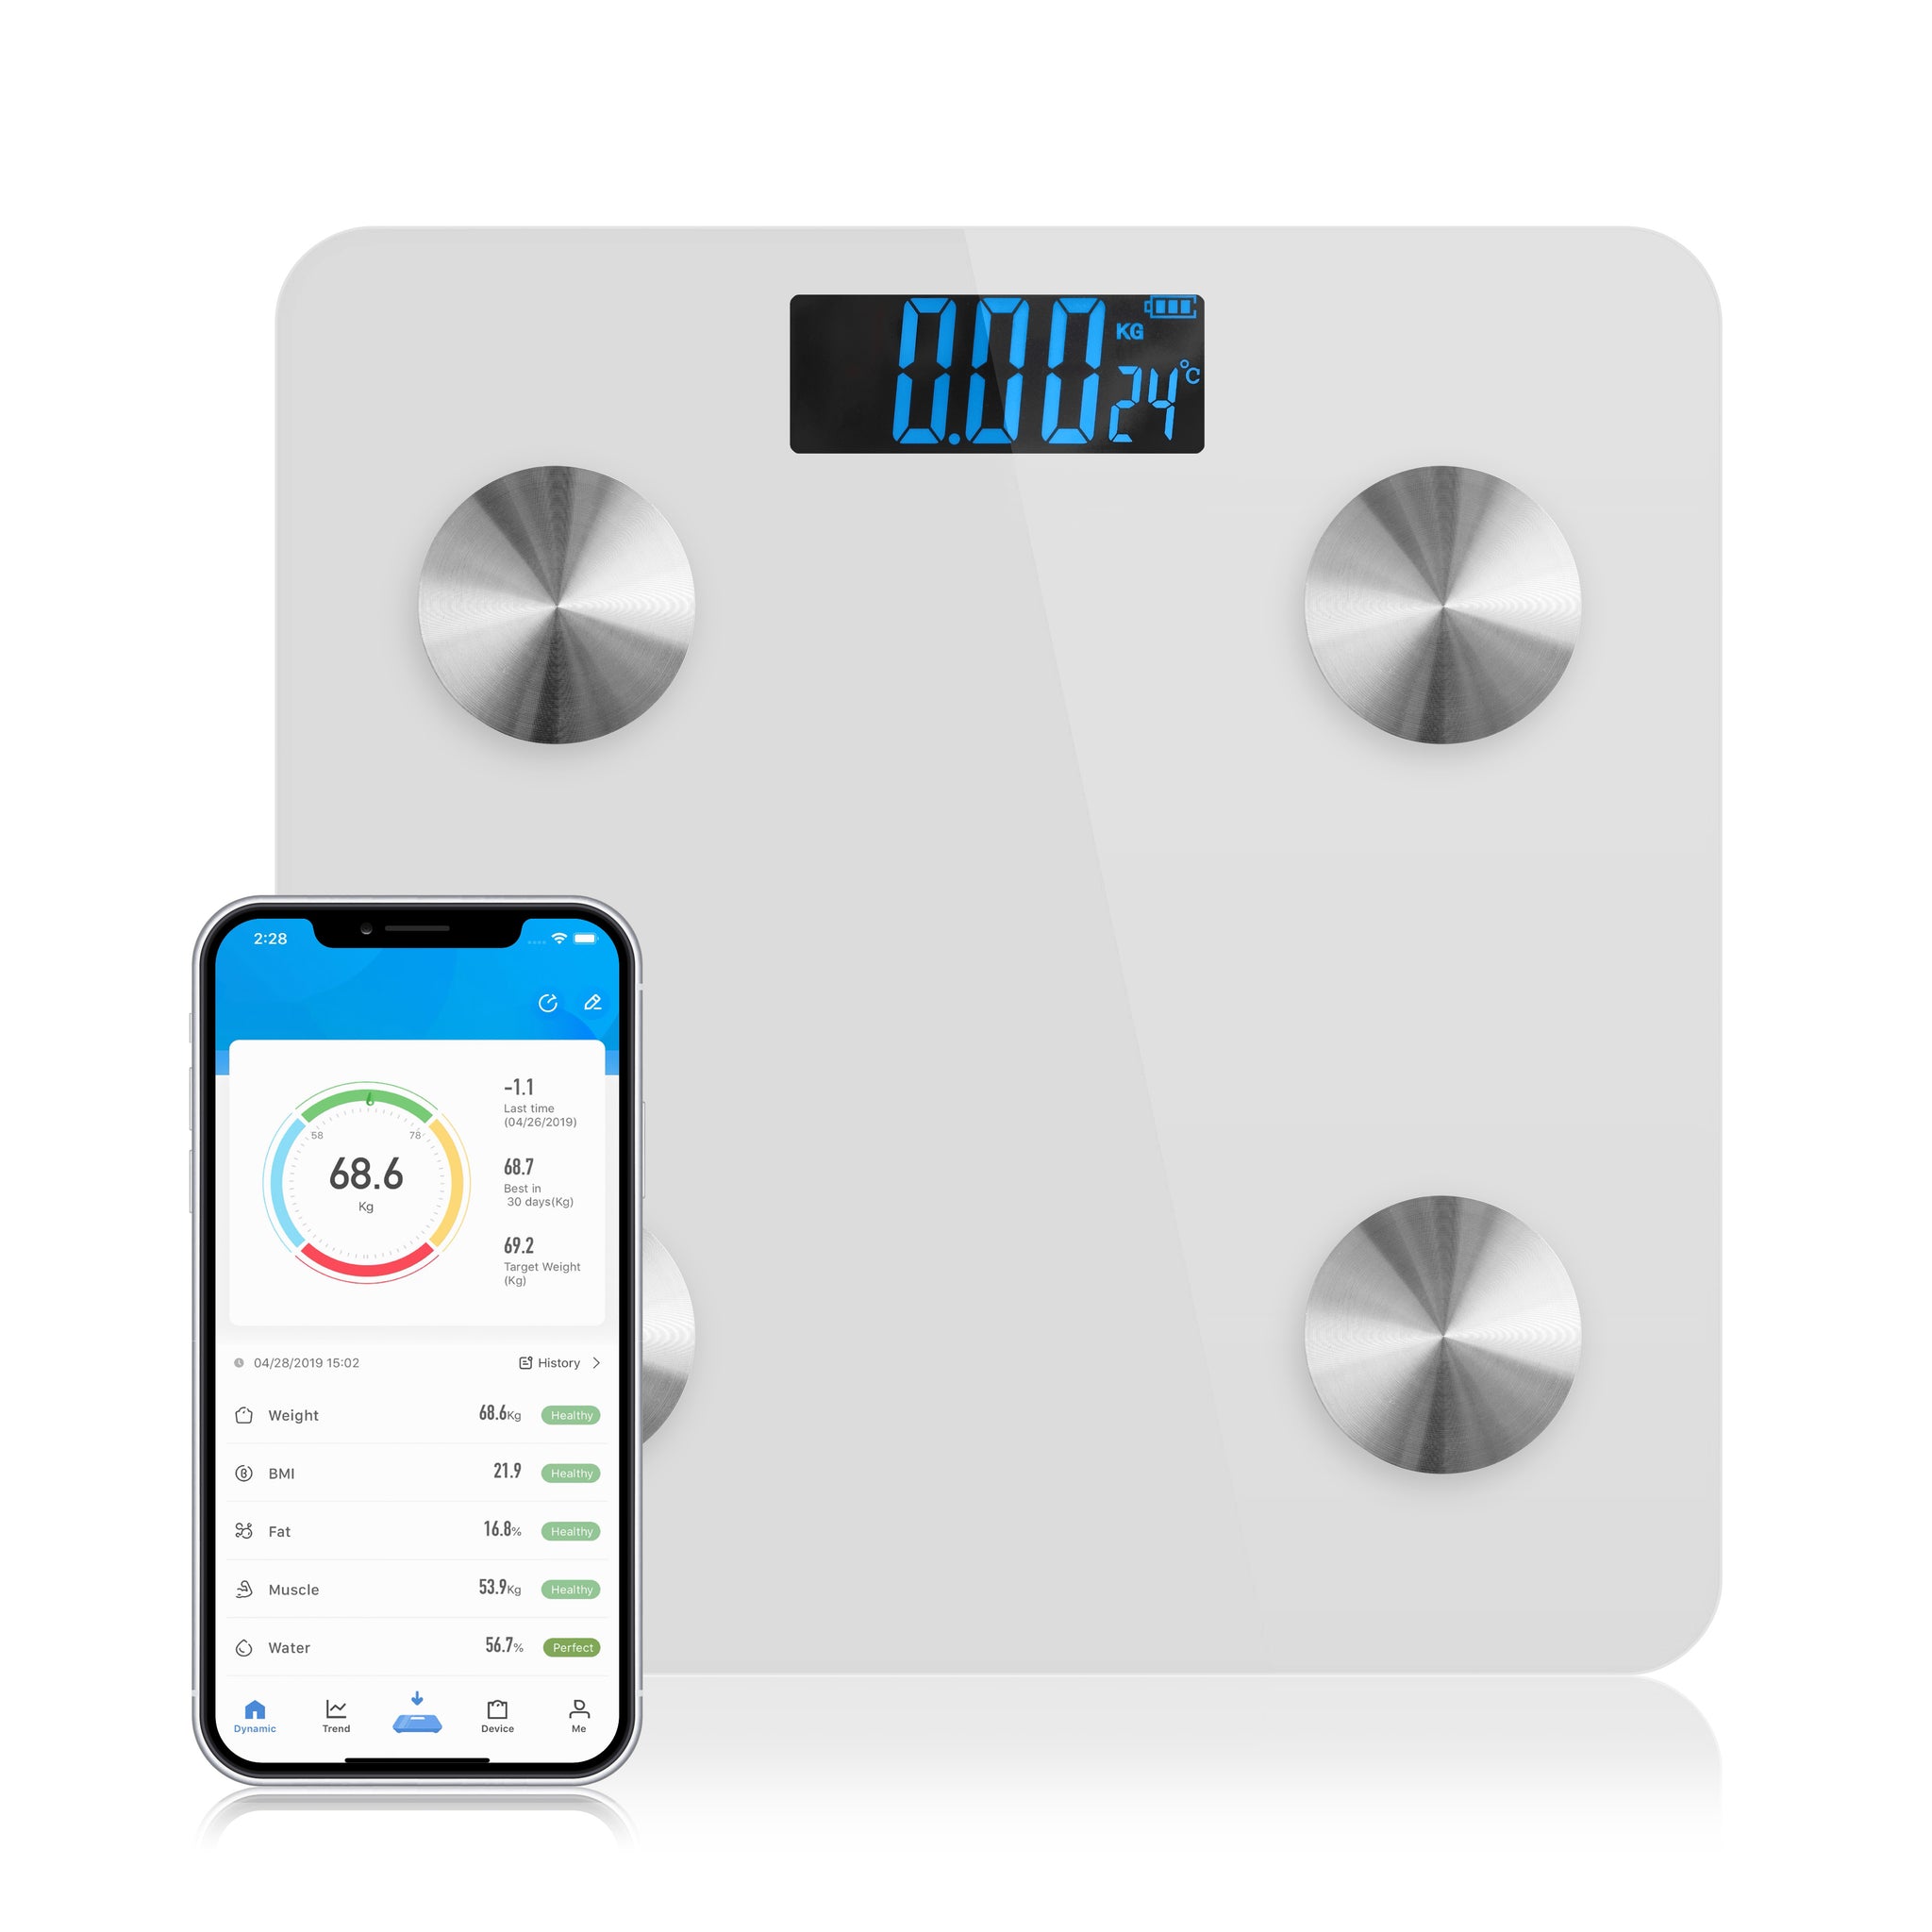 Bathroom Scales, DIKI Digital Body Fat Scale Bluetooth Smart Body Weight  scales High Accuracy Ultra Slim Analyser Measuring 10 Body data LCD Display  with Free App for iOS, Android Devices-White DIKI-U